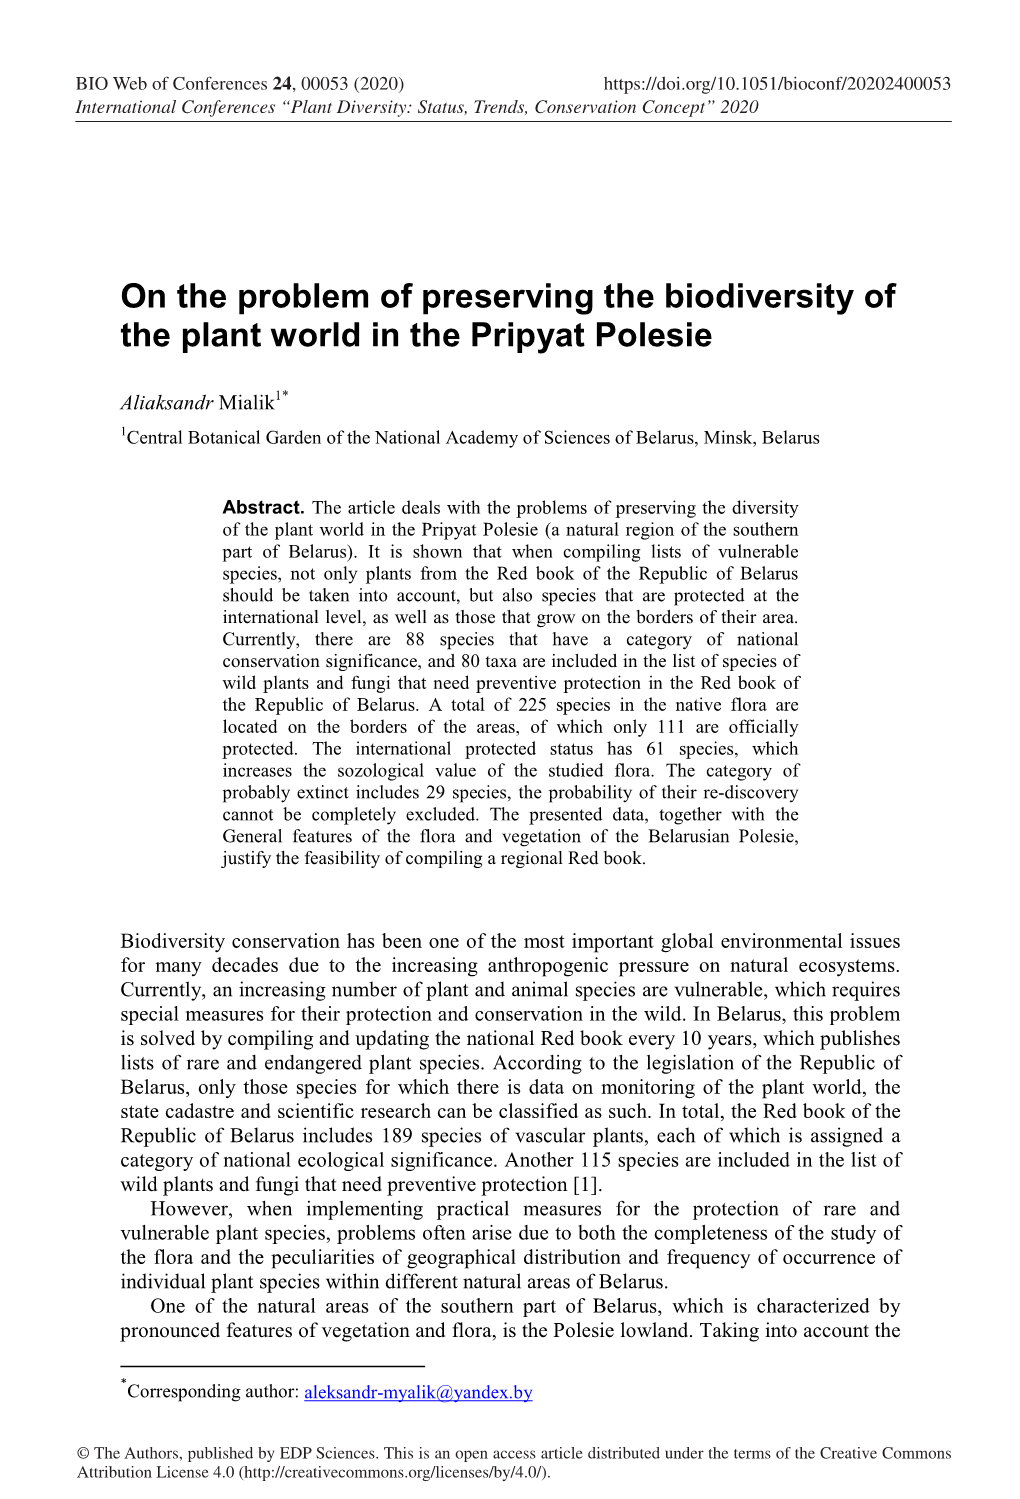 On the Problem of Preserving the Biodiversity of the Plant World in the Pripyat Polesie